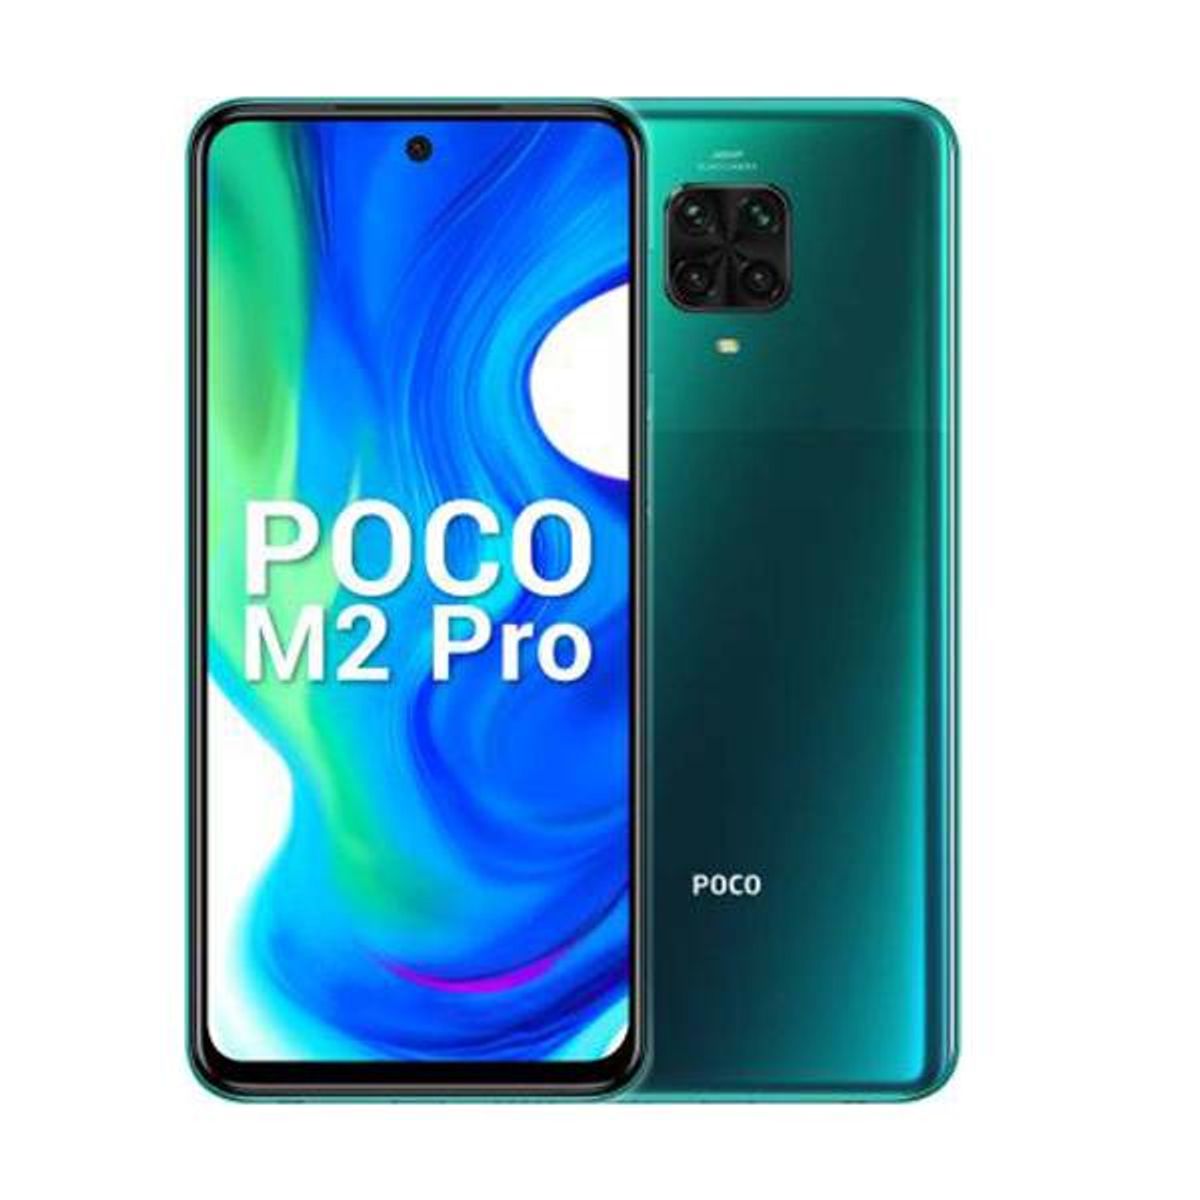 How to Factory Reset Poco M2 Mobile Phone?